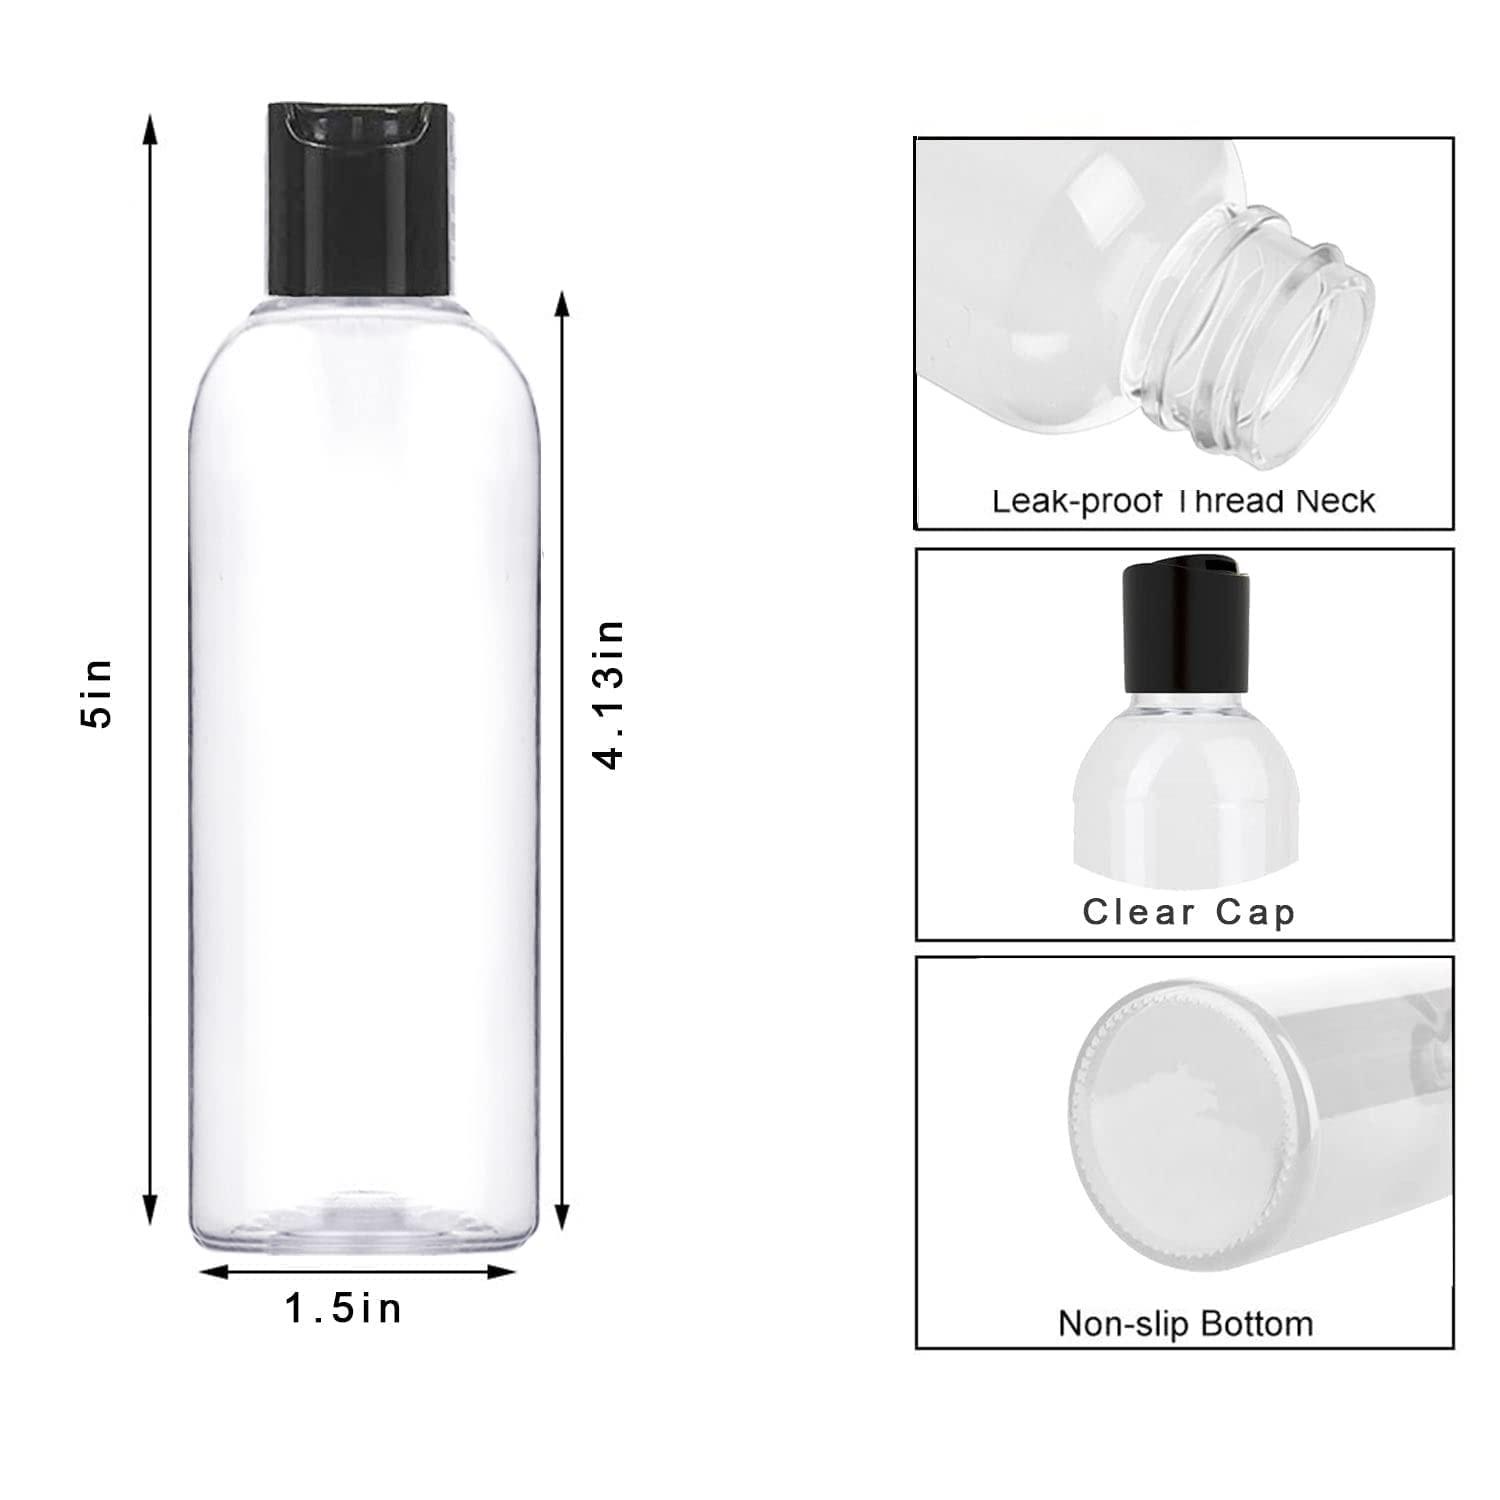  YICTEK Empty Plastic Travel Bottles Containers for Toiletries,  TSA Approved Travel Size Toiletries Bottles Kit for Liquids Shampoo  Conditioner Lotion, Carry-On Set for Women/Men : Beauty & Personal Care